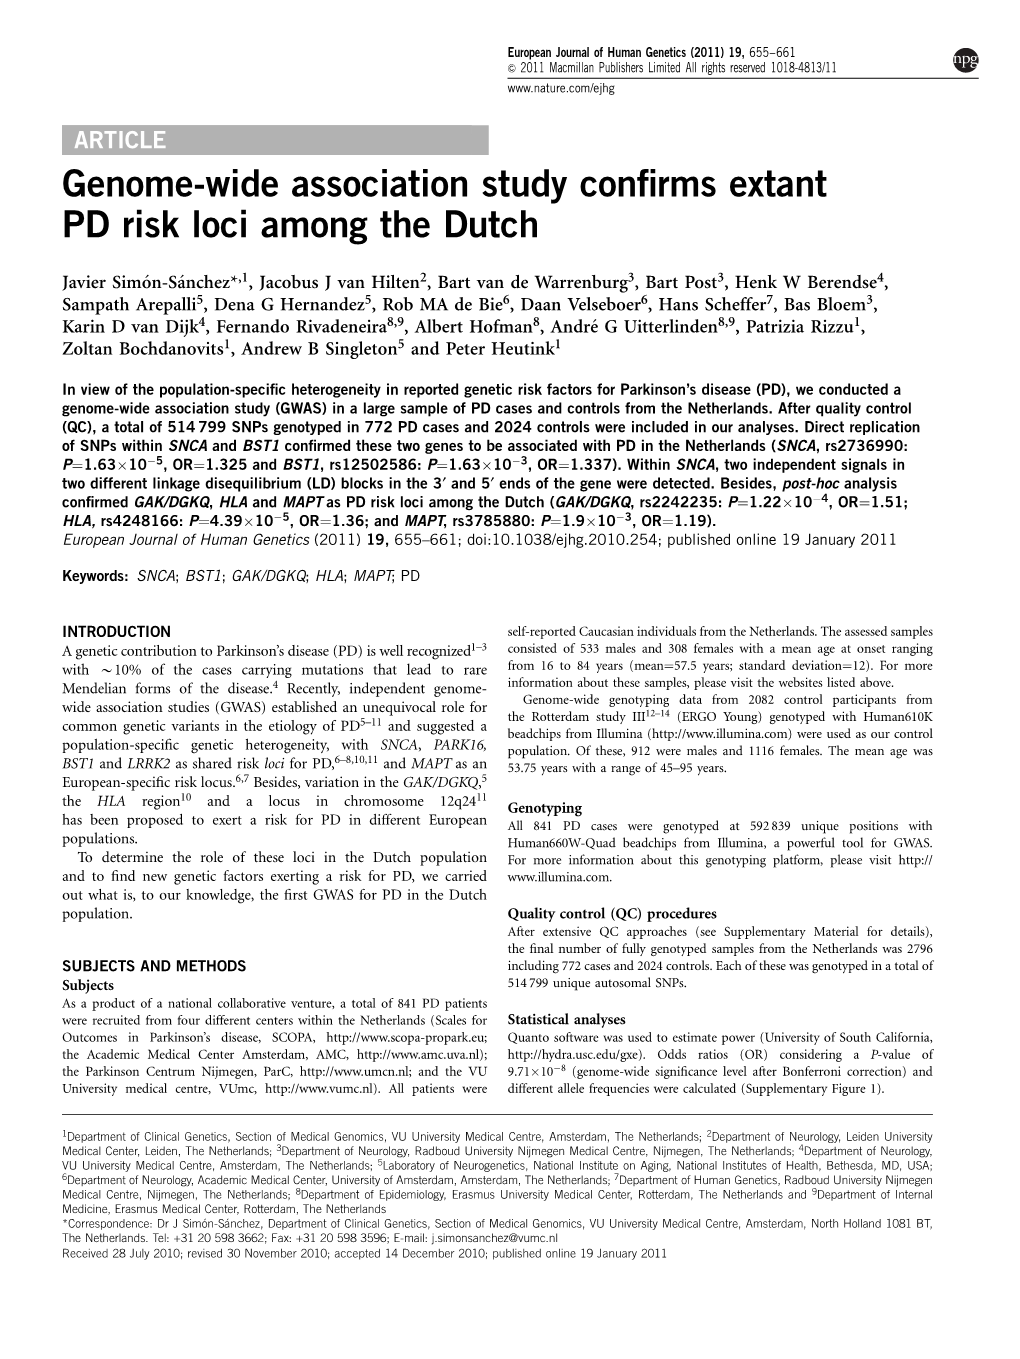 Genome-Wide Association Study Confirms Extant PD Risk Loci Among